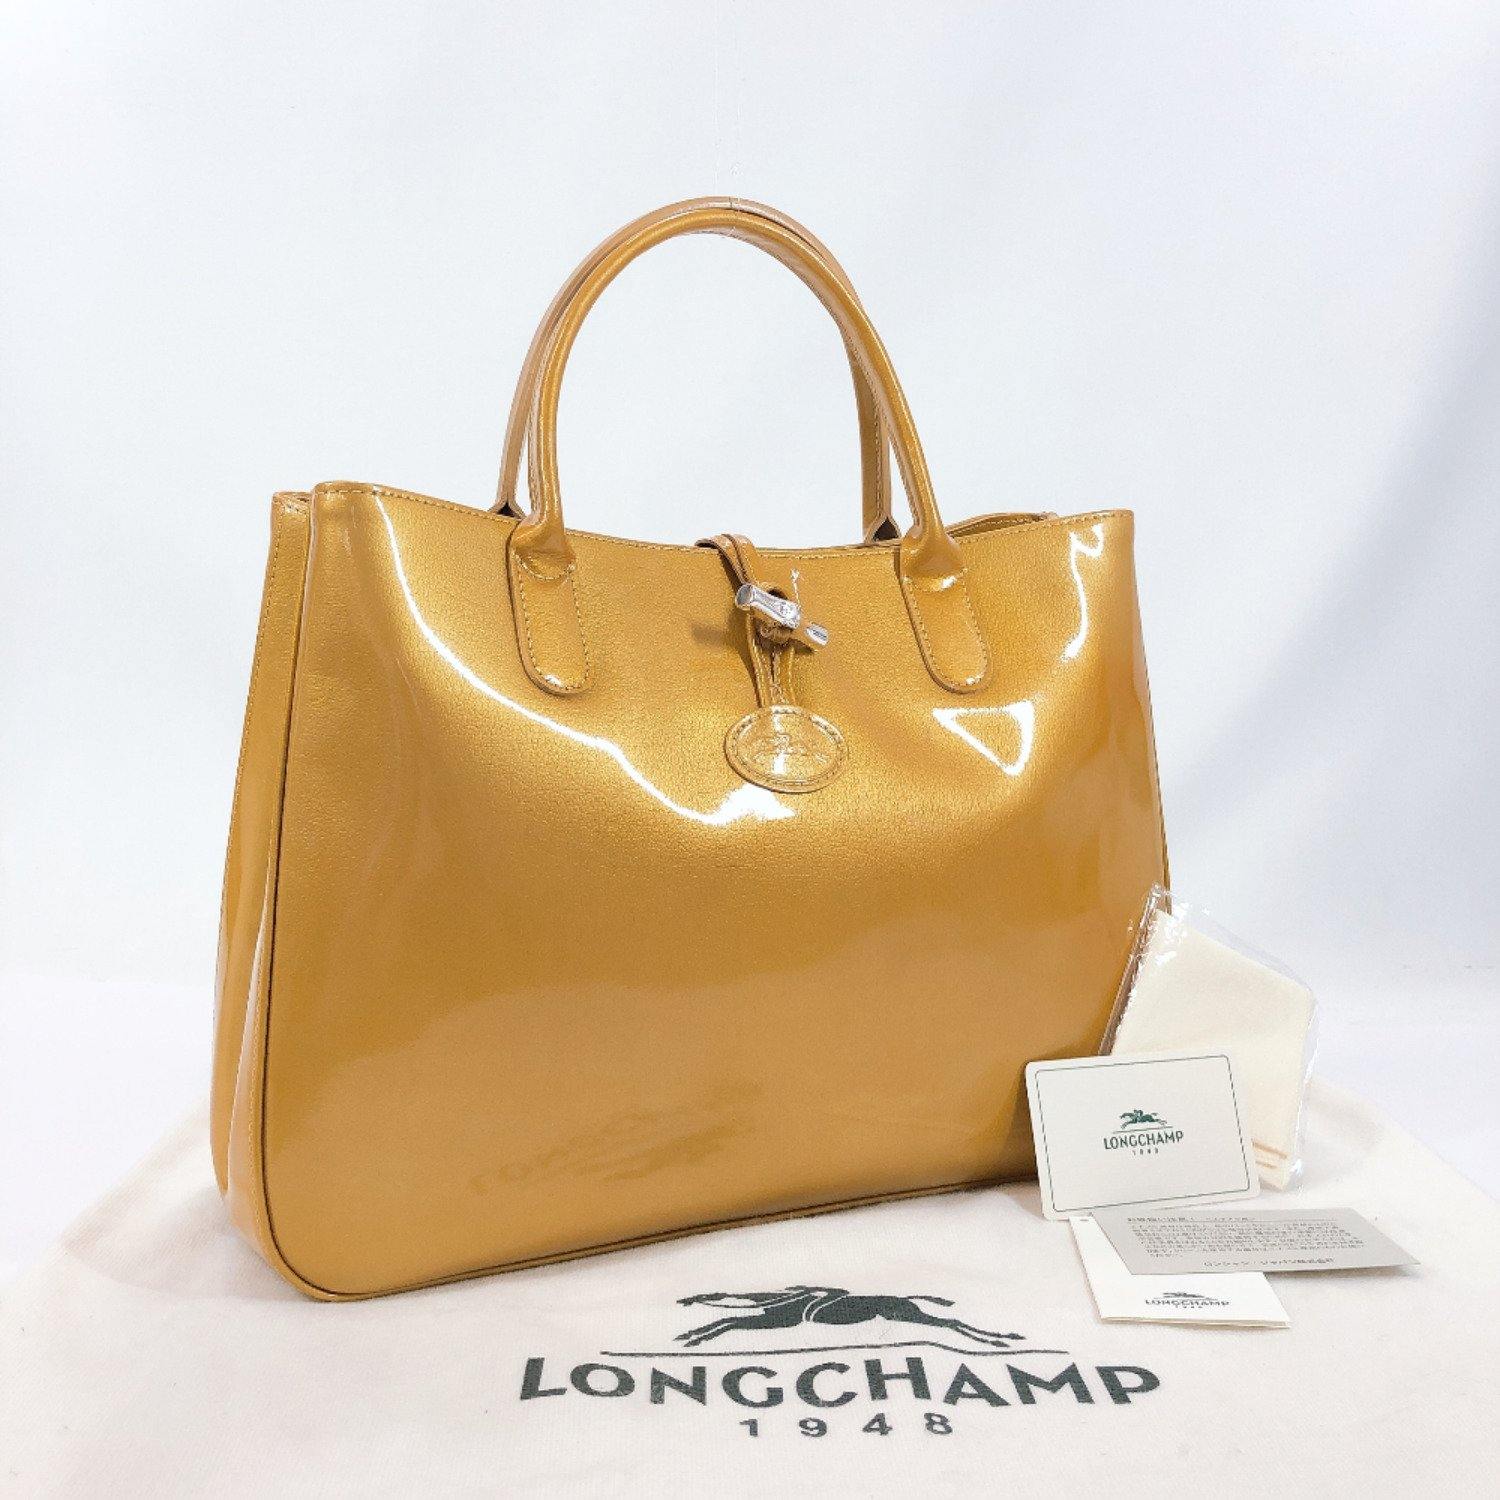 Longchamp Tote Bag Patent leather Mustard color Women Used